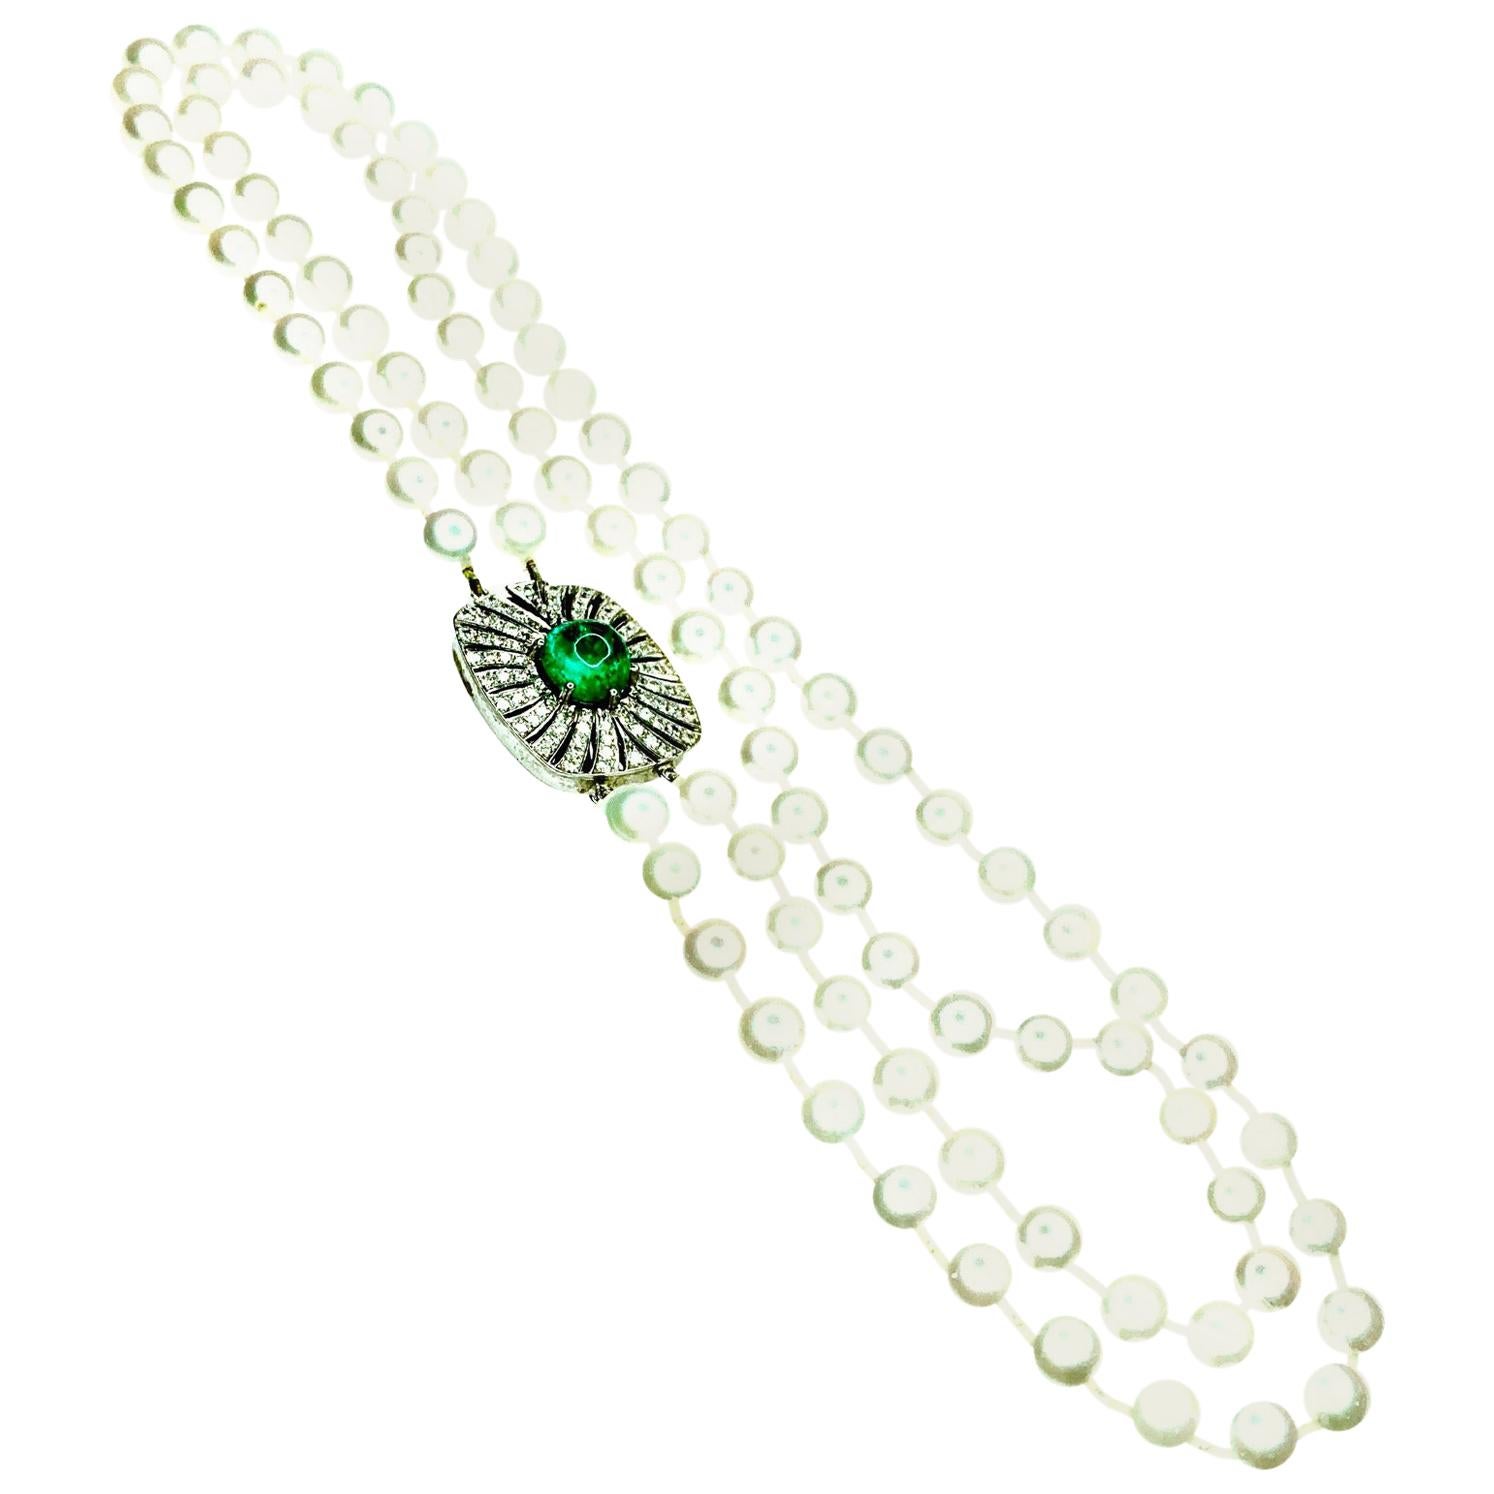 GEMOLITHOS Cabochon Emerald Diamond and Cultured Pearl Necklace For Sale